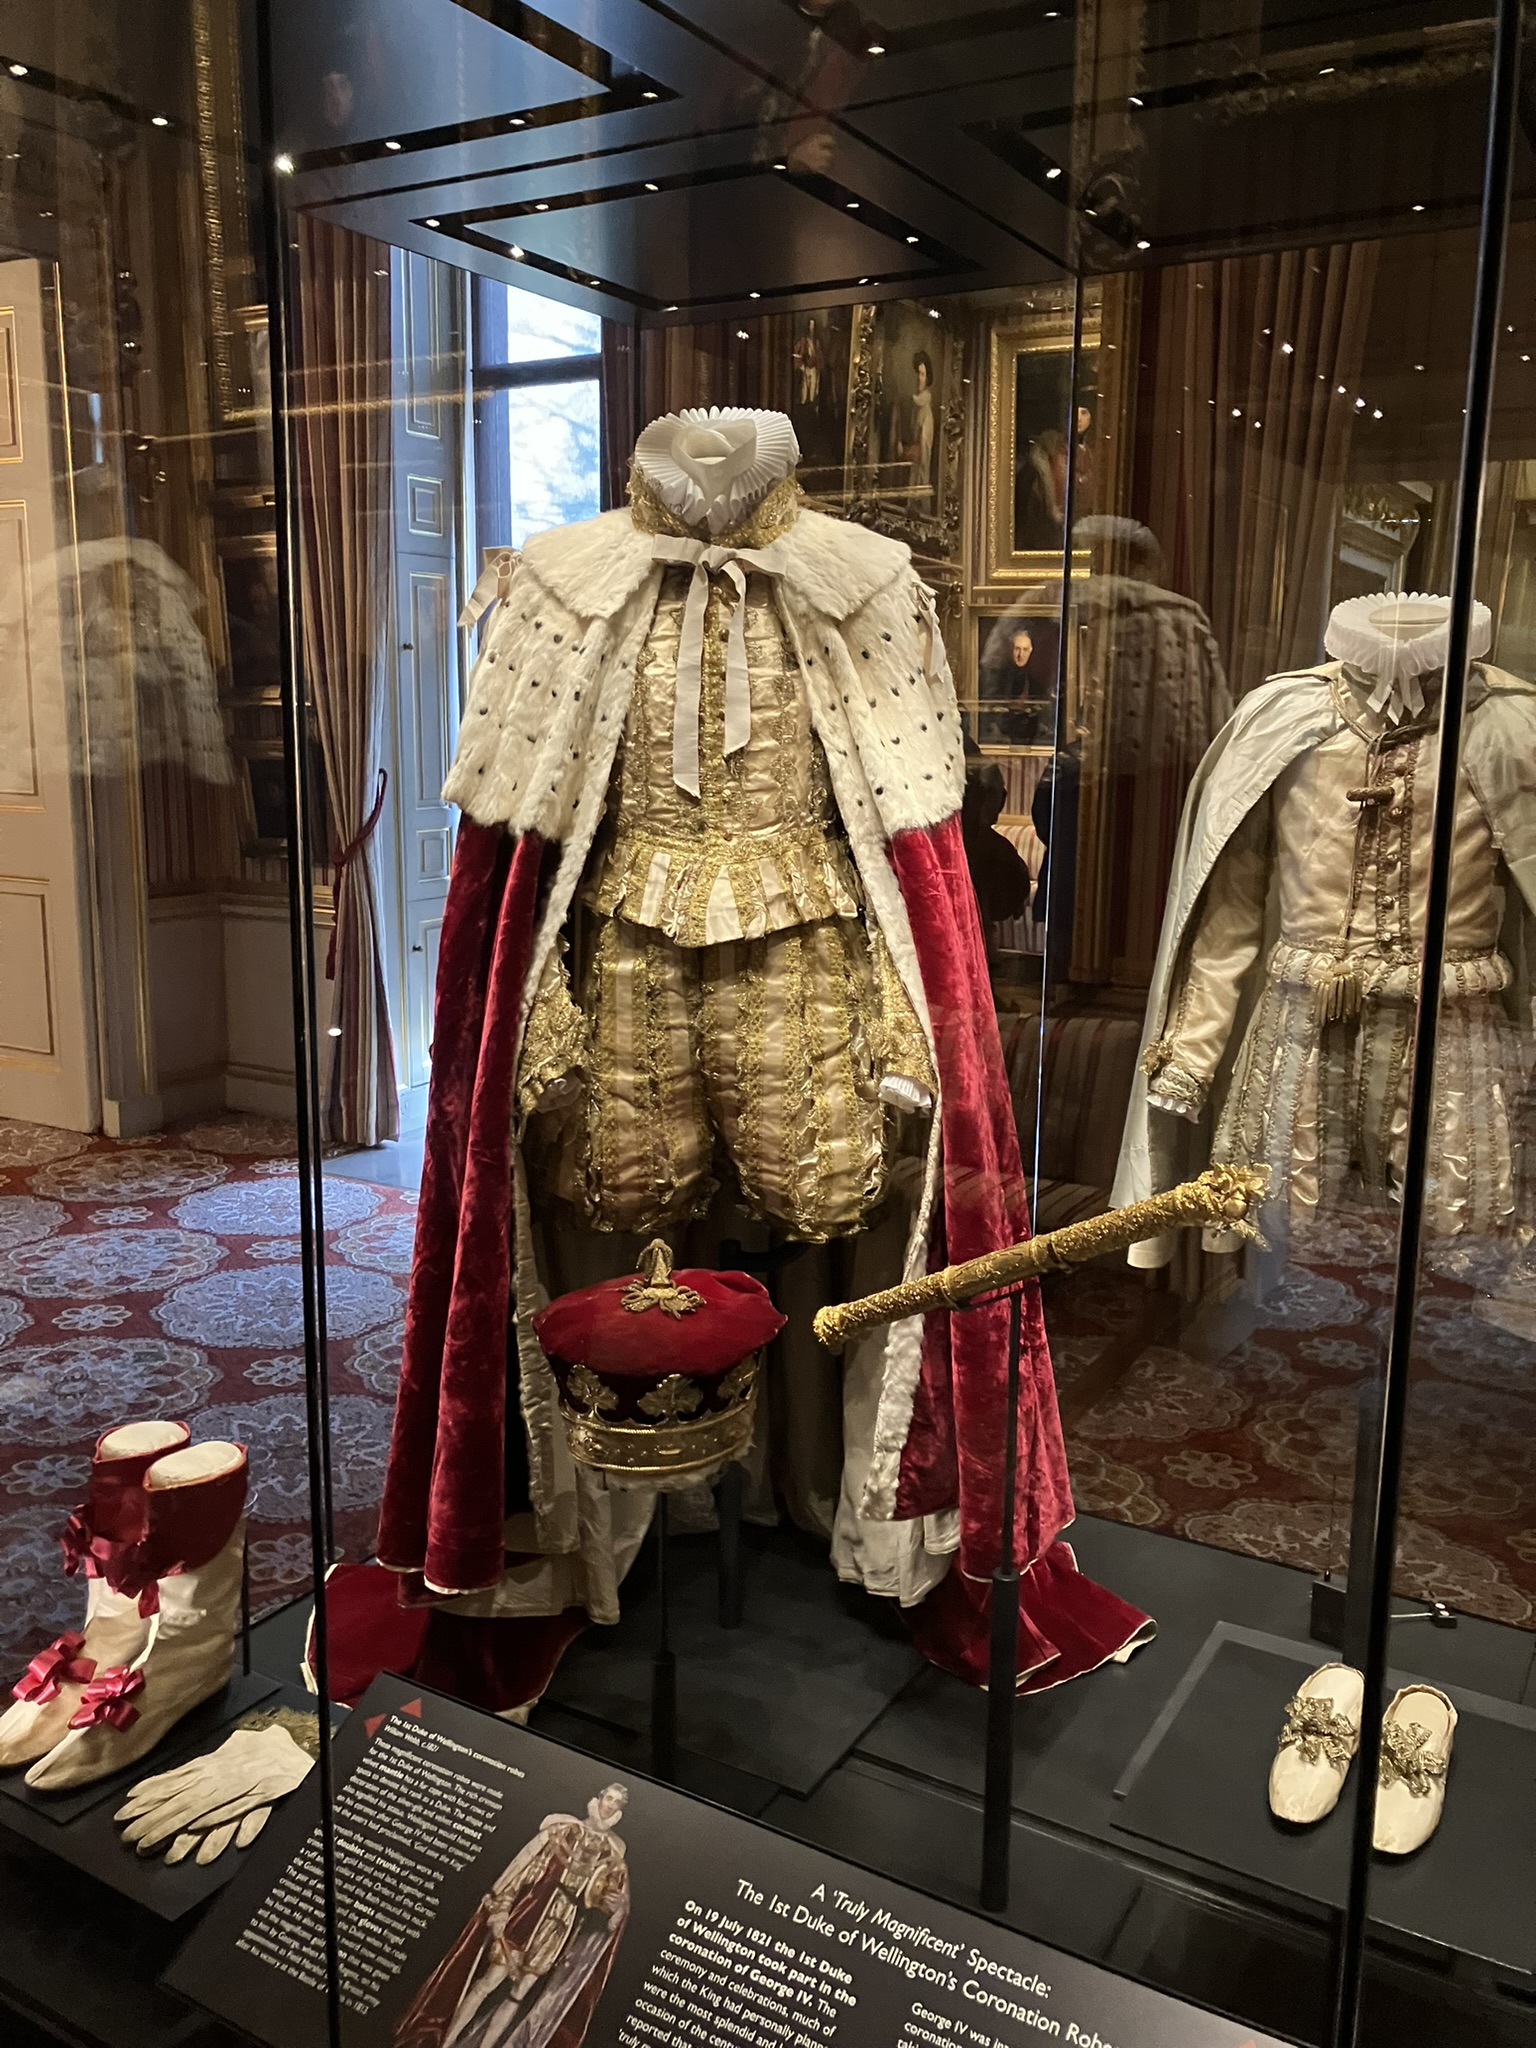 Coronation robes of the Duke of Wellington, worn at the coronation of George IV. Apsley House. Photograph Willem Vogelsang.